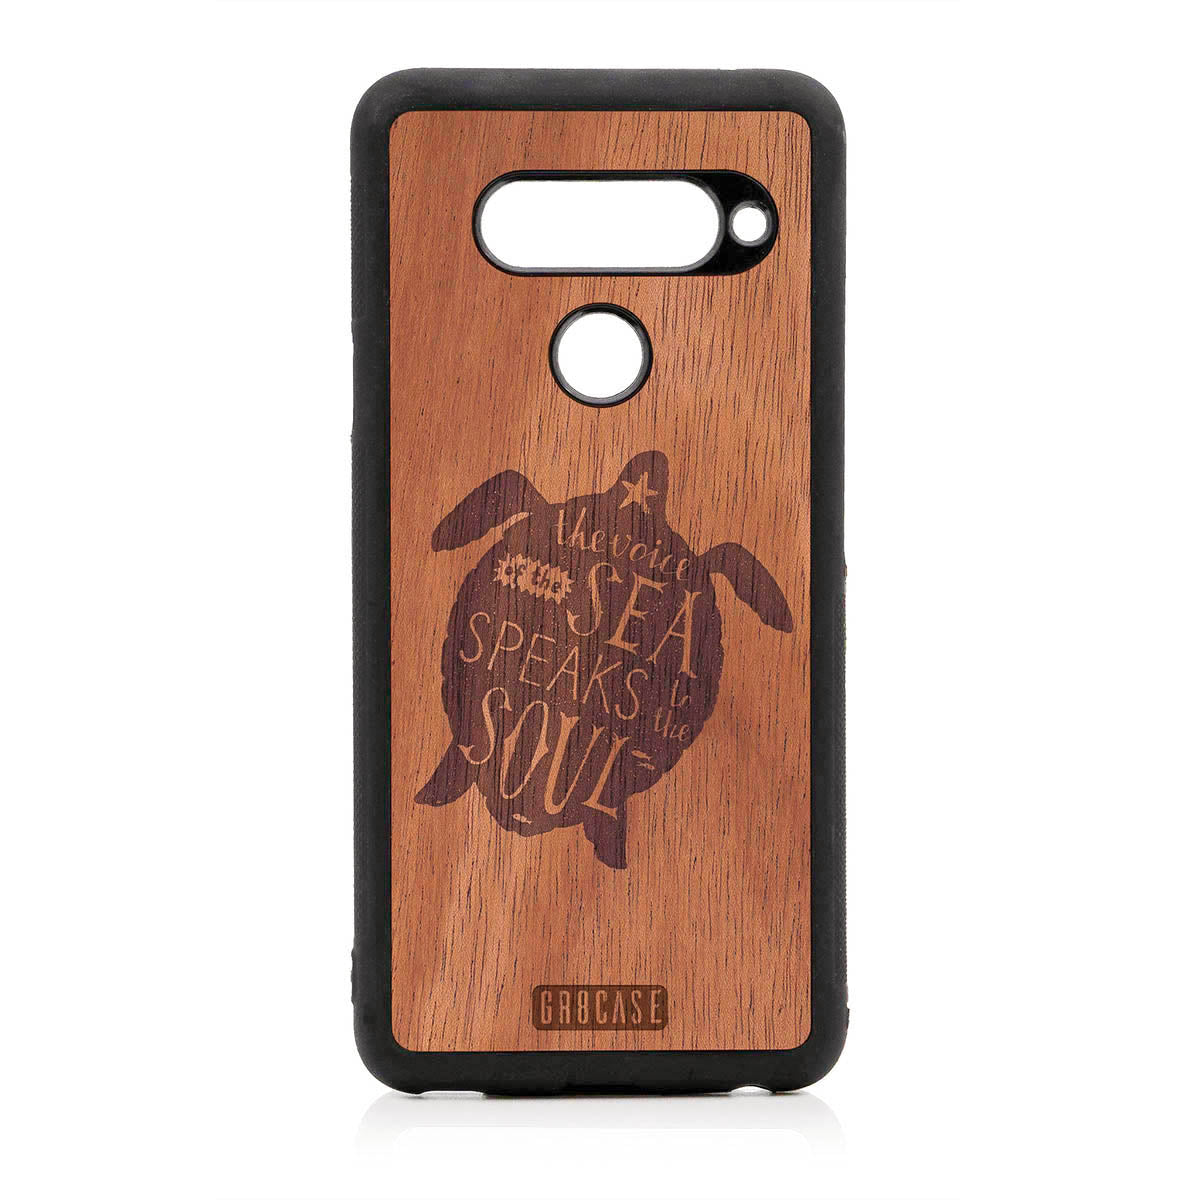 The Voice Of The Sea Speaks To The Soul (Turtle) Design Wood Case For LG V40